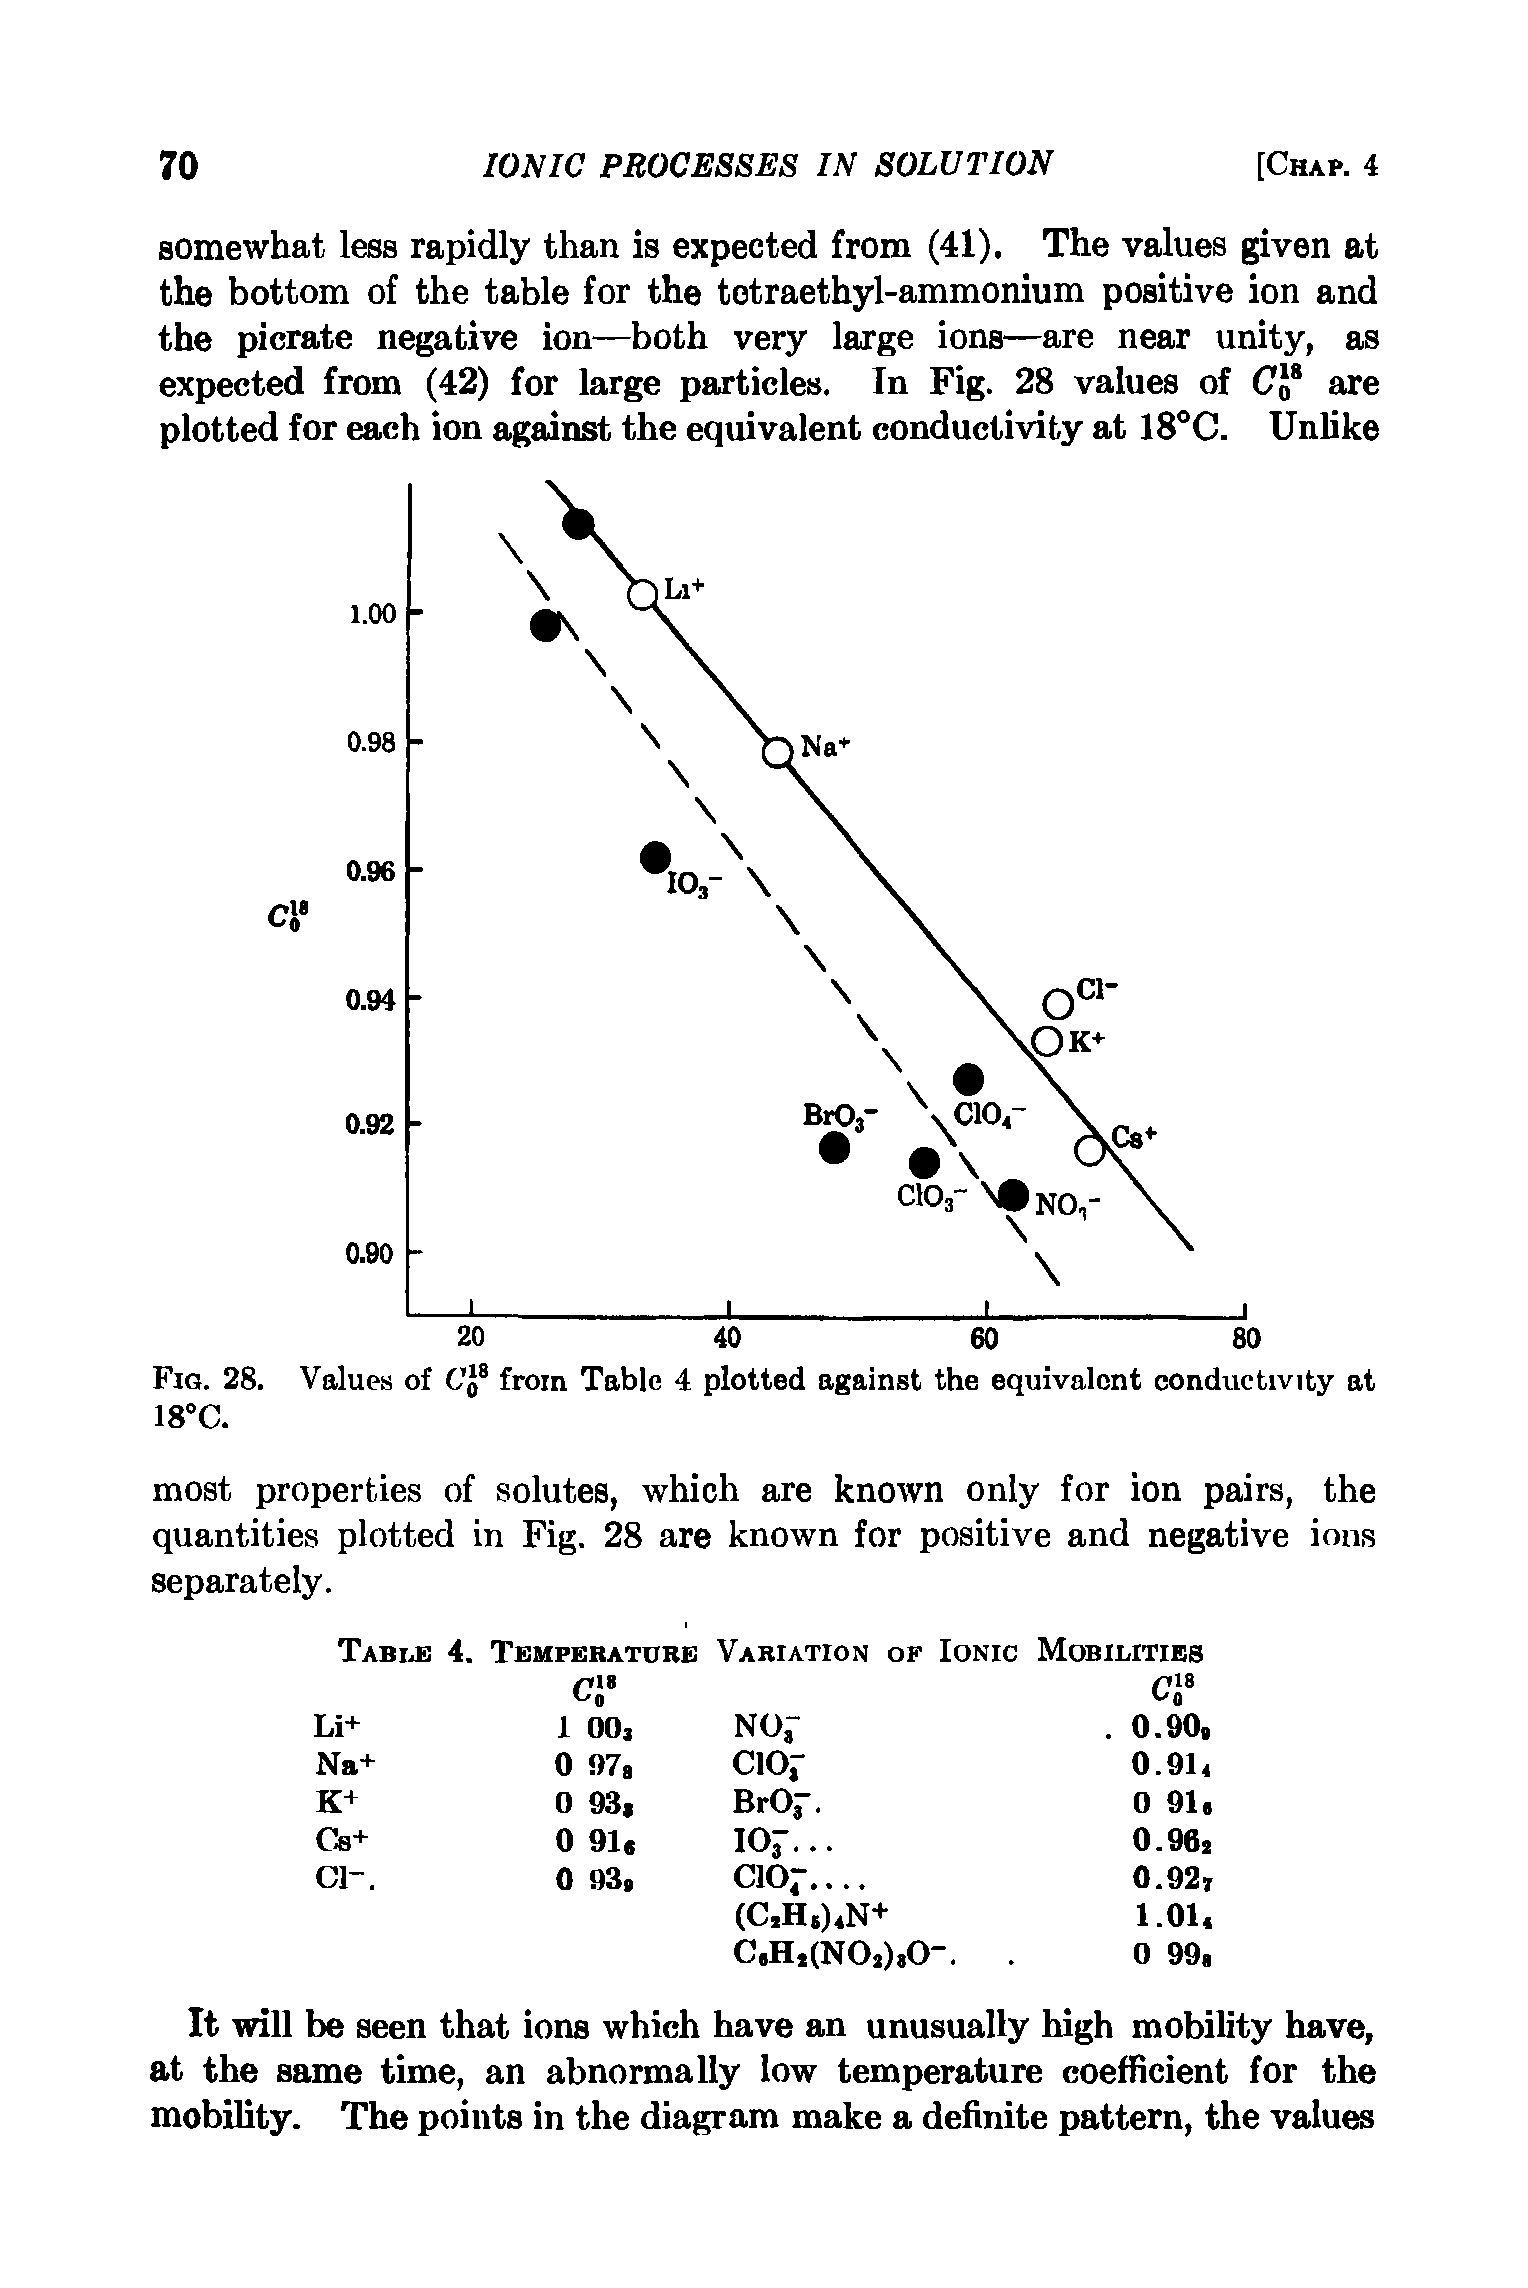 Fig. 28. Values of C J8 from Table 4 plotted against the equivalent conductivity at 18°C.